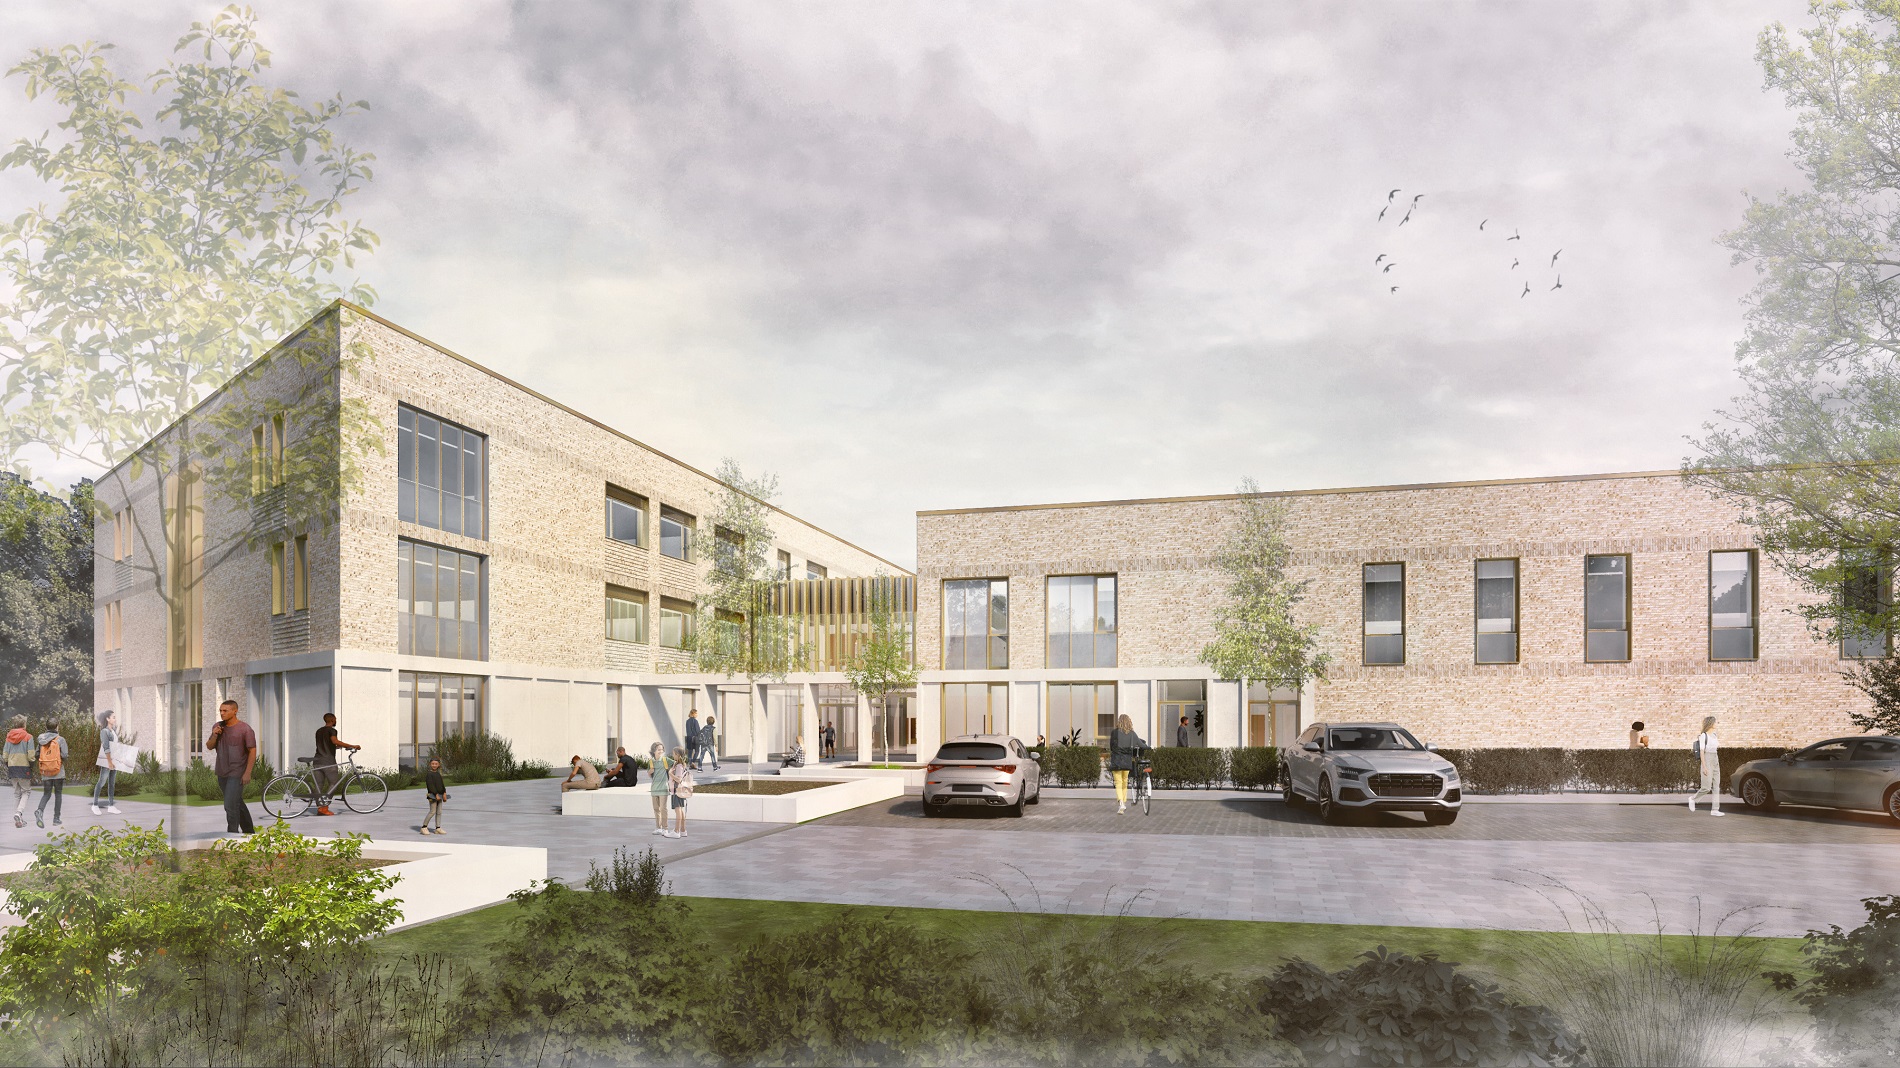 Construction begins on Dundee’s new £100m community campus